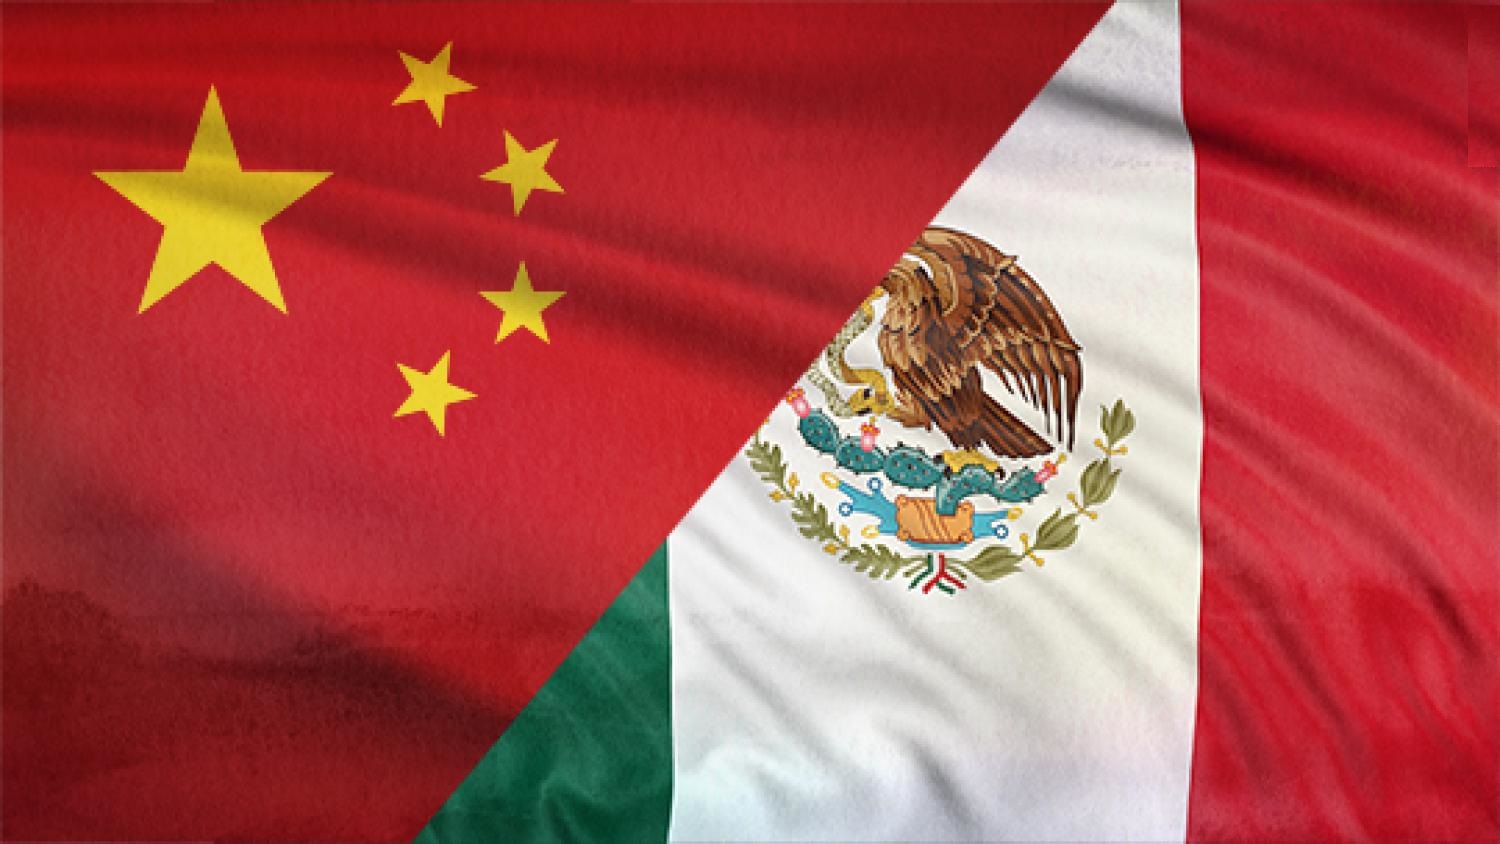 Sea Freight Shipping from China to Mexico [Guide 2022]